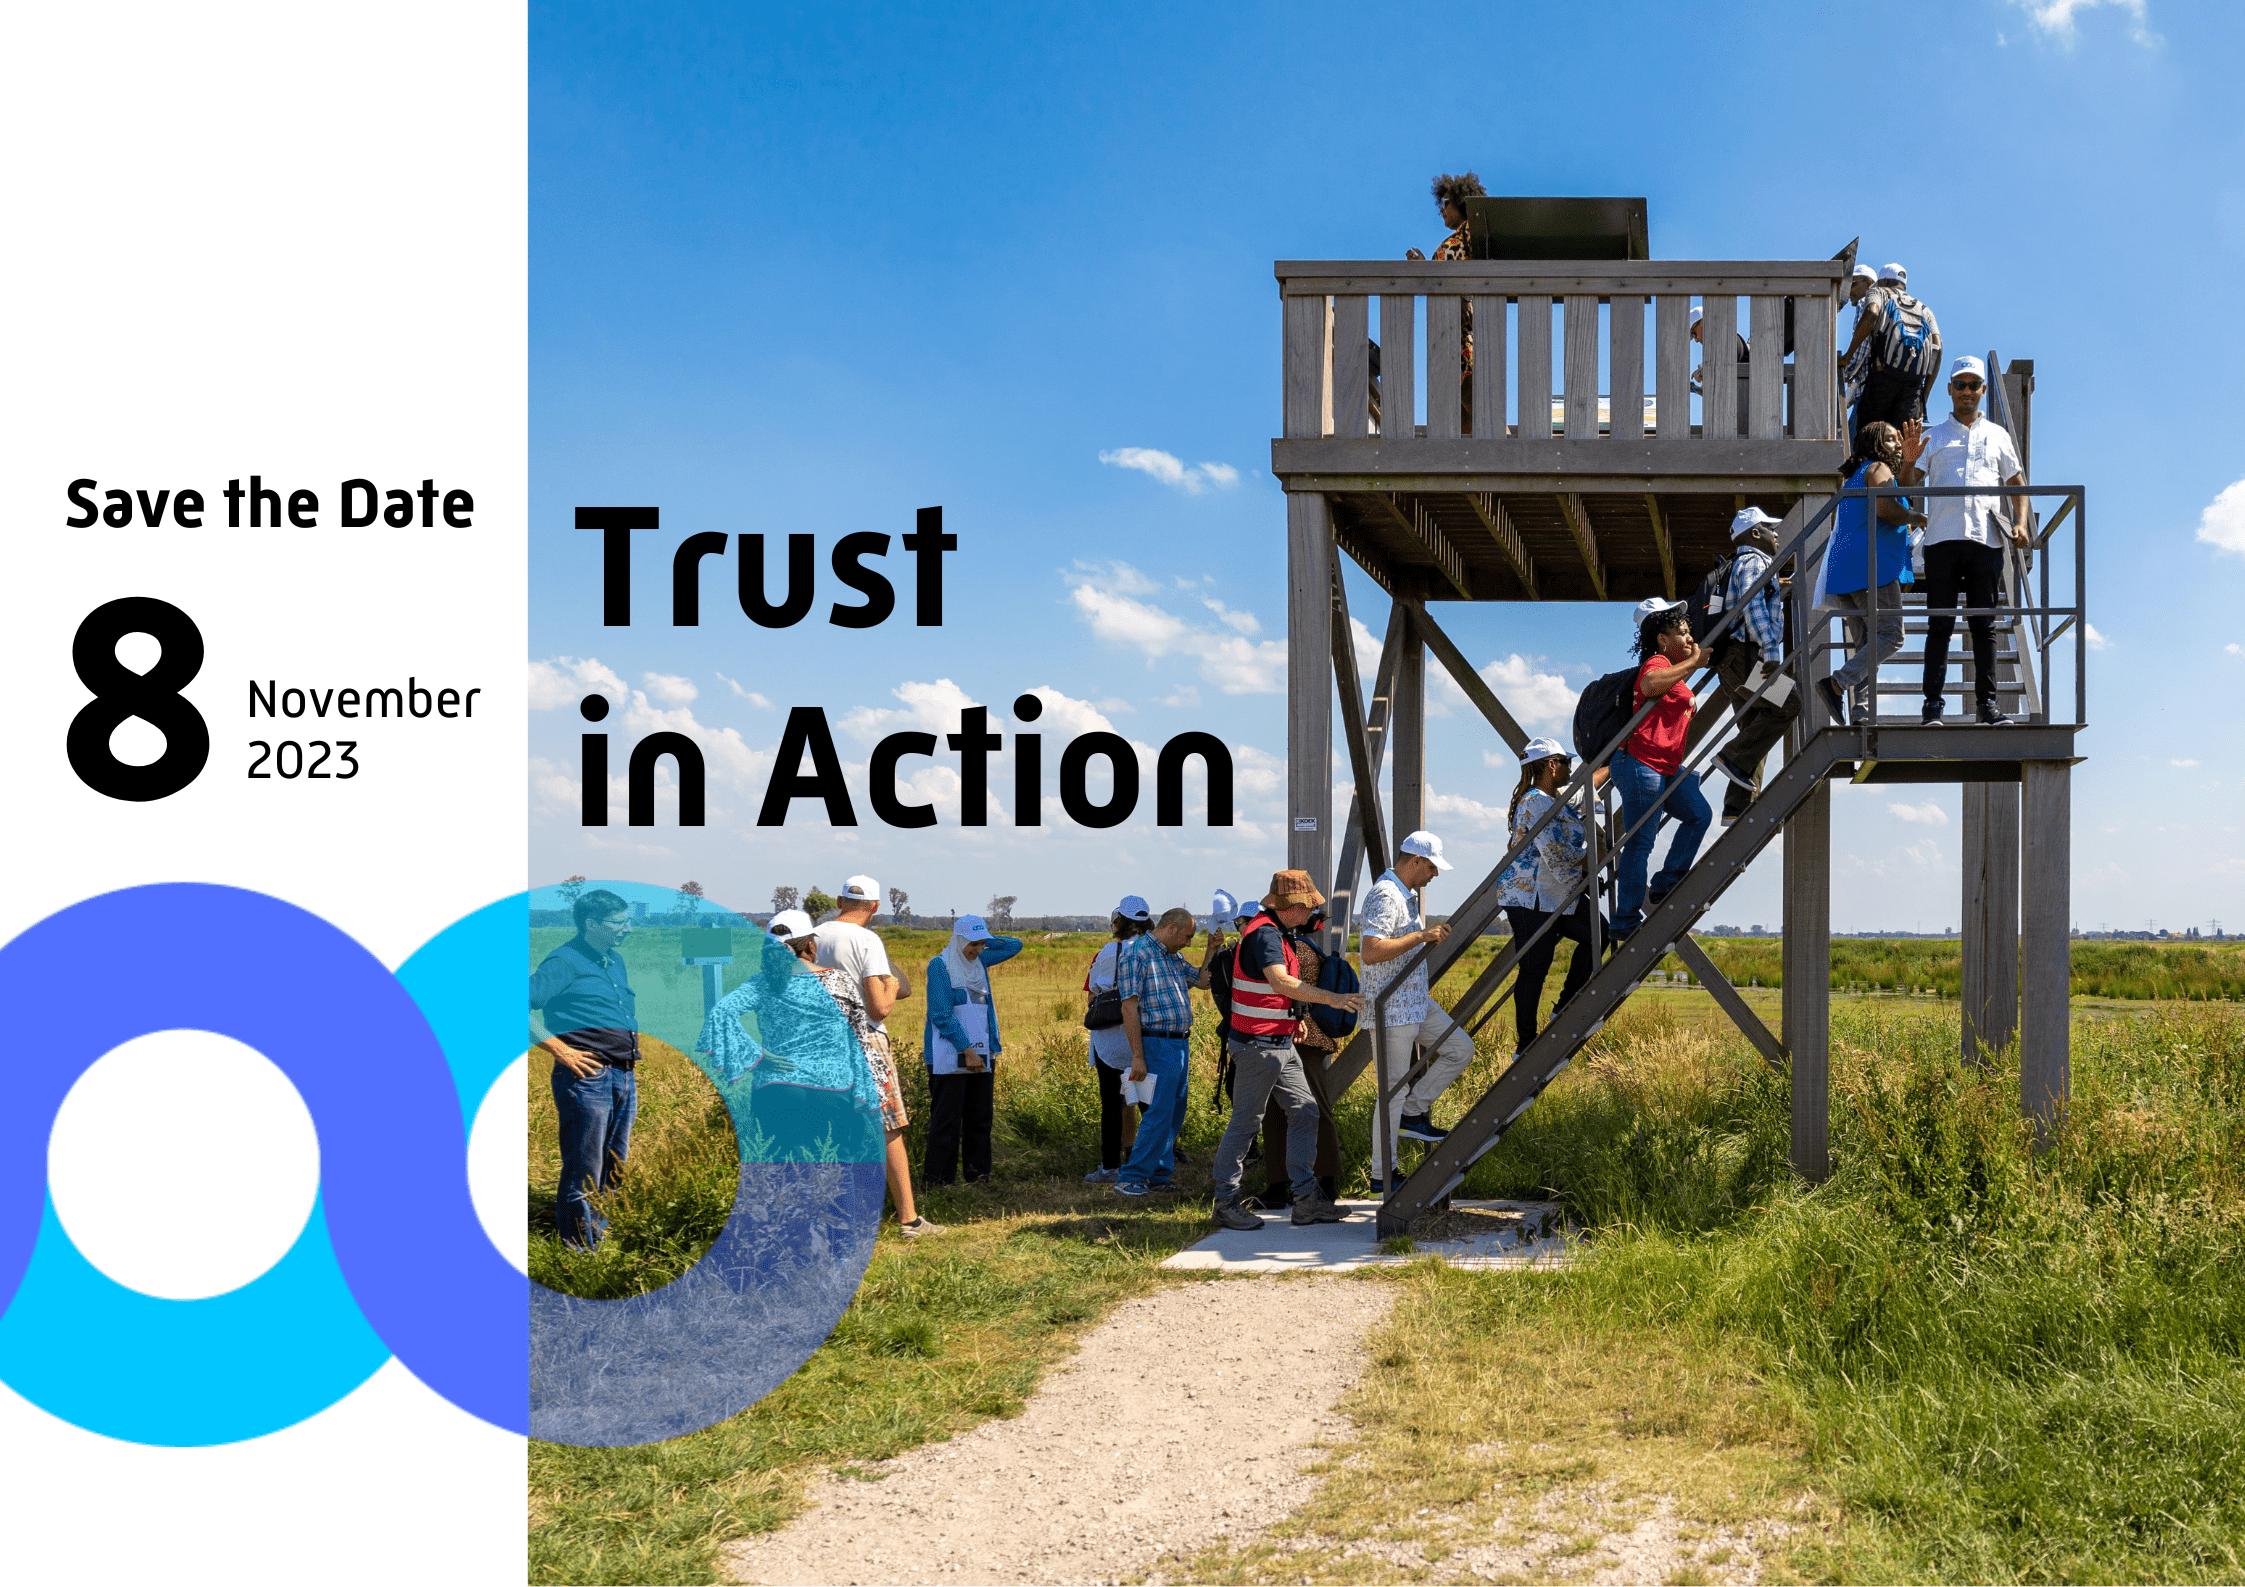 Save the date for iCRA's online conference 'Trust in Action! Nov 8th